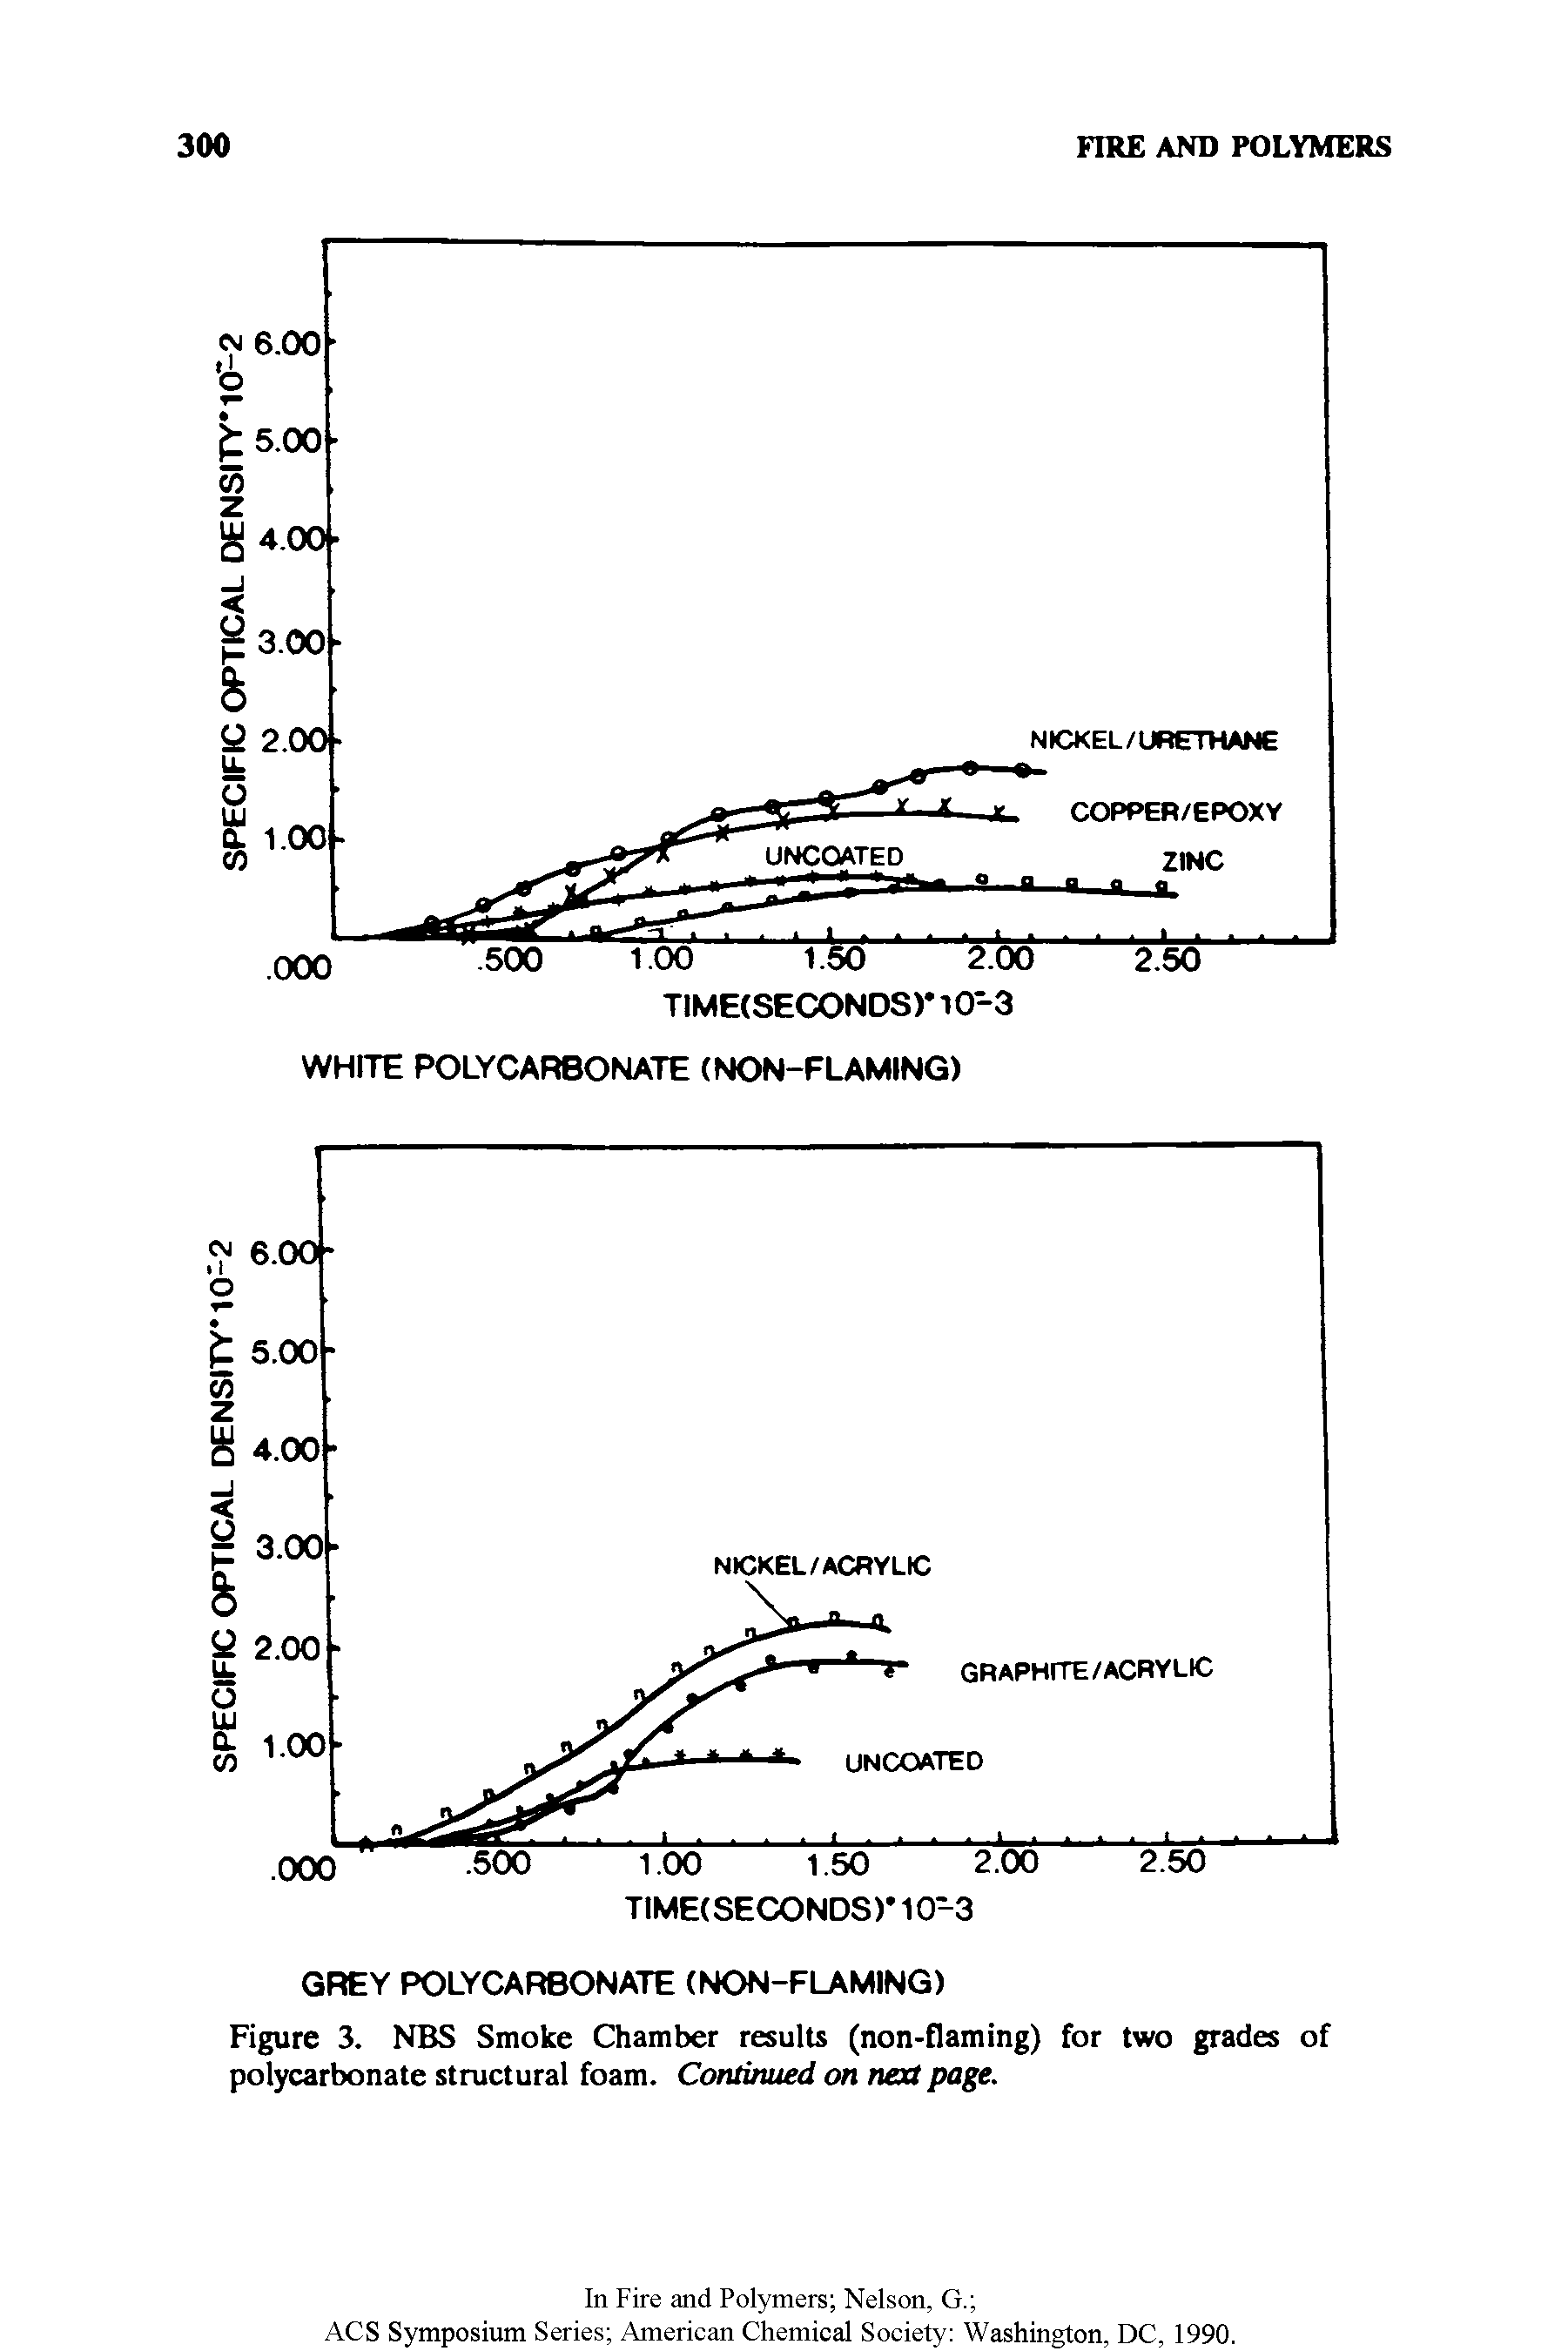 Figure 3. NBS Smoke Chamber results (non-flaming) for two grades of polycarbonate structural foam. Continued on next page.